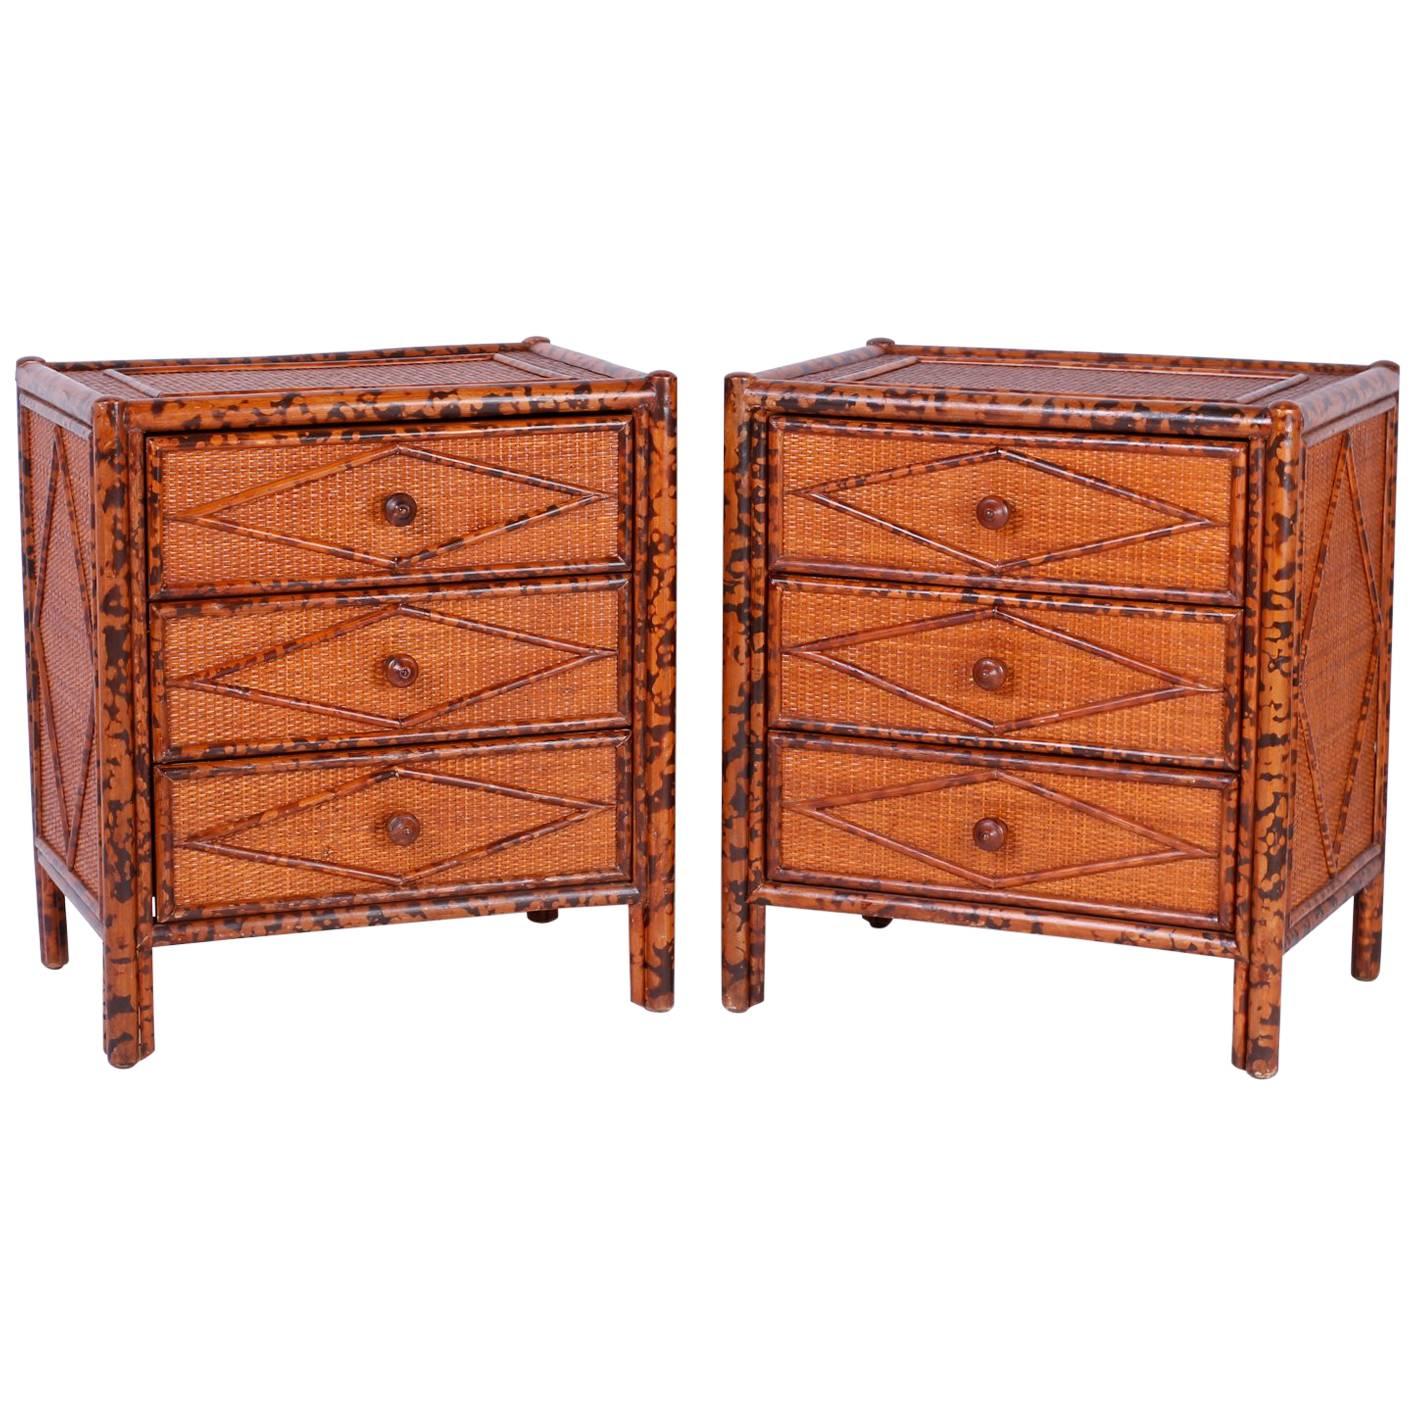 Pair of British Colonial Style Bamboo Nightstands or Tables